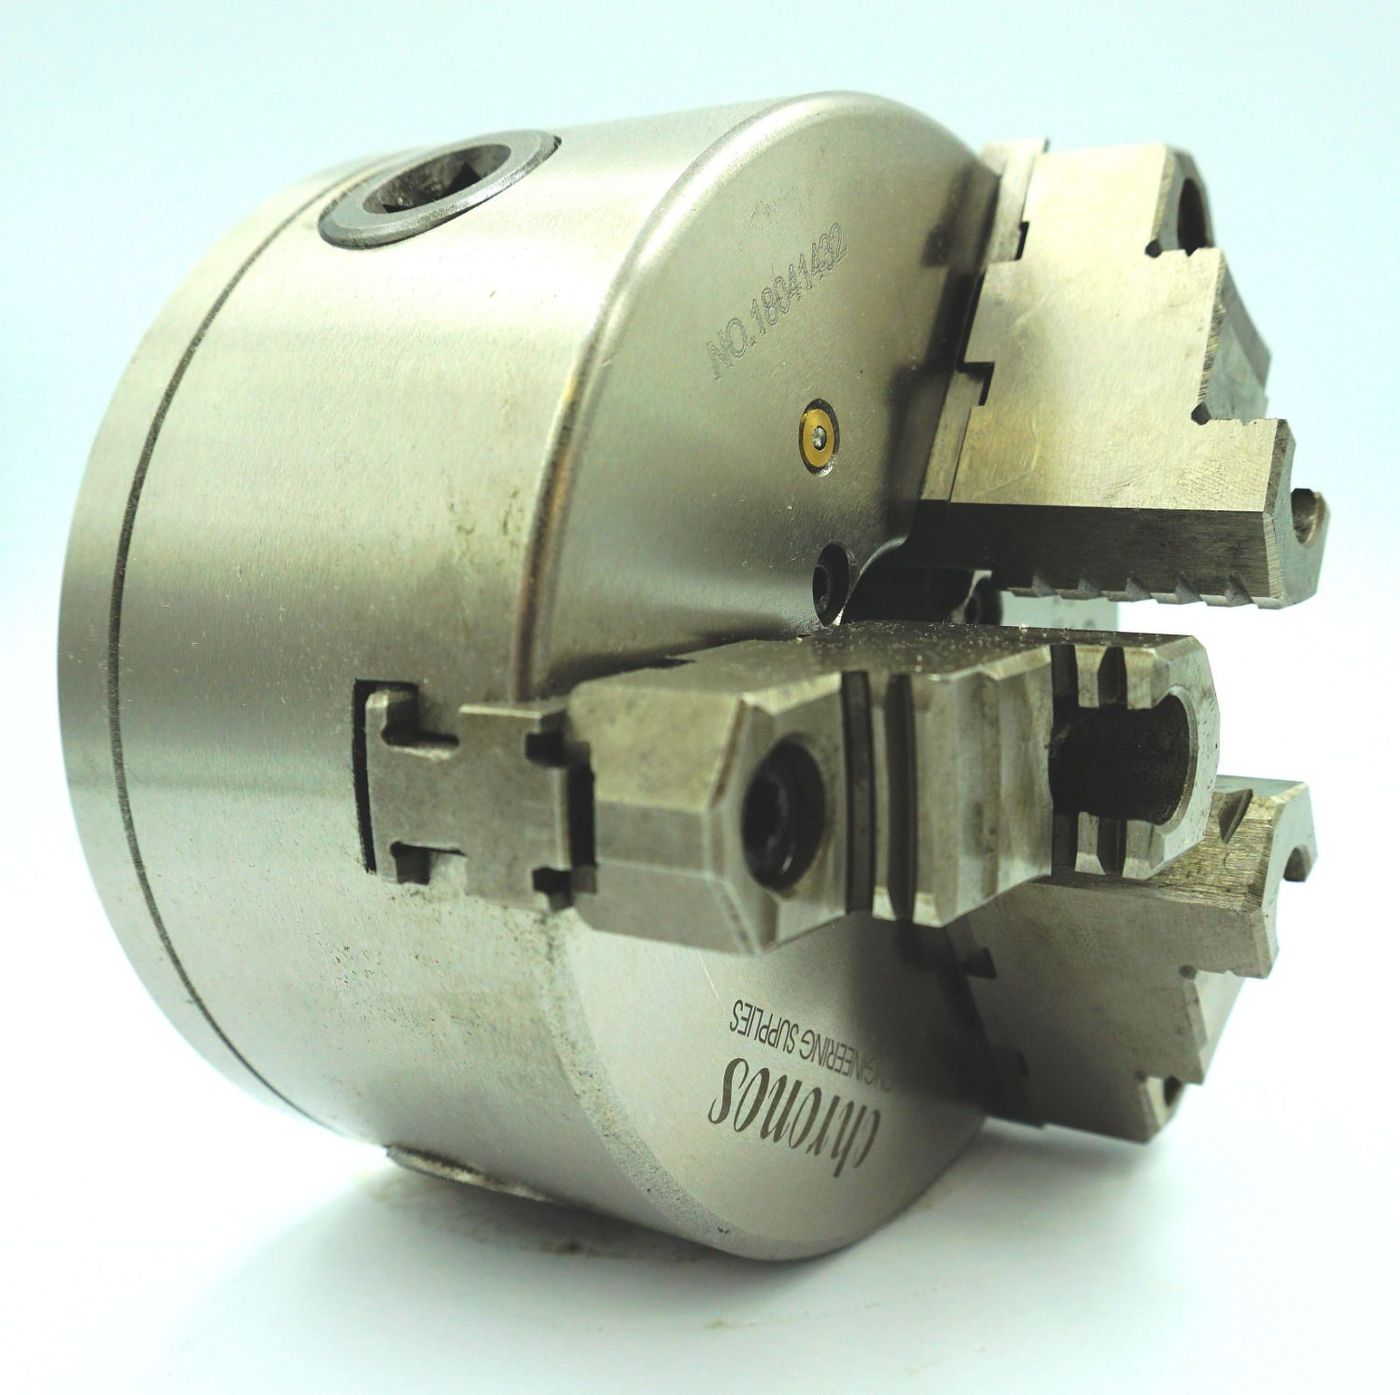 160 mm 3 Jaw Lathe Chuck with Direct Mount D1-3 Camlock Ref: K11160AD3